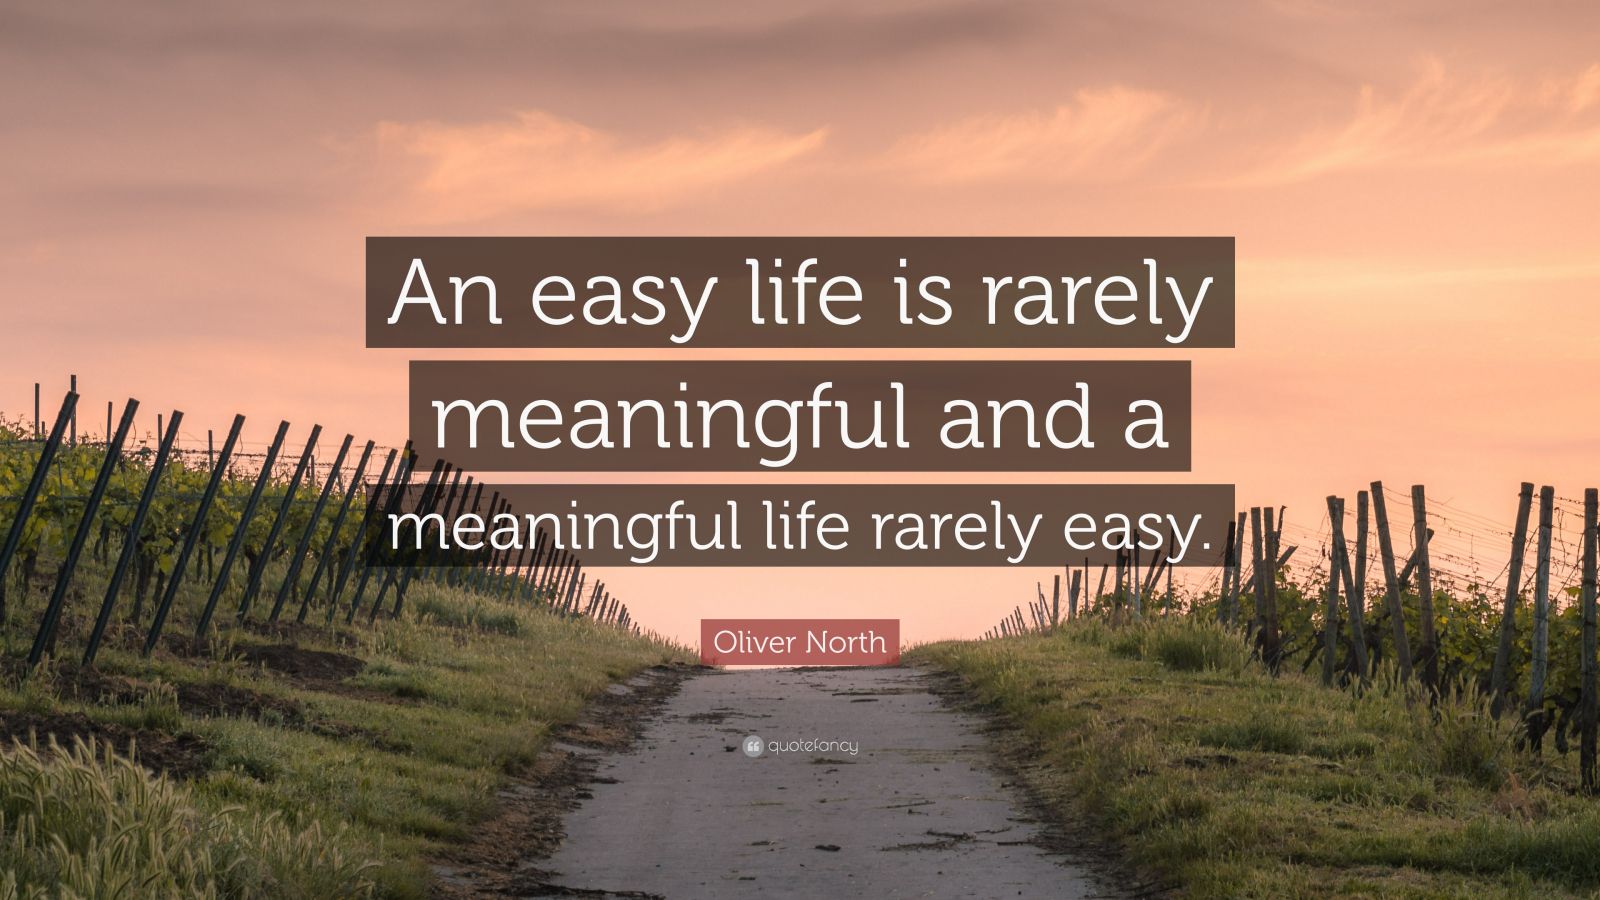 Oliver North Quote: “An easy life is rarely meaningful and a meaningful